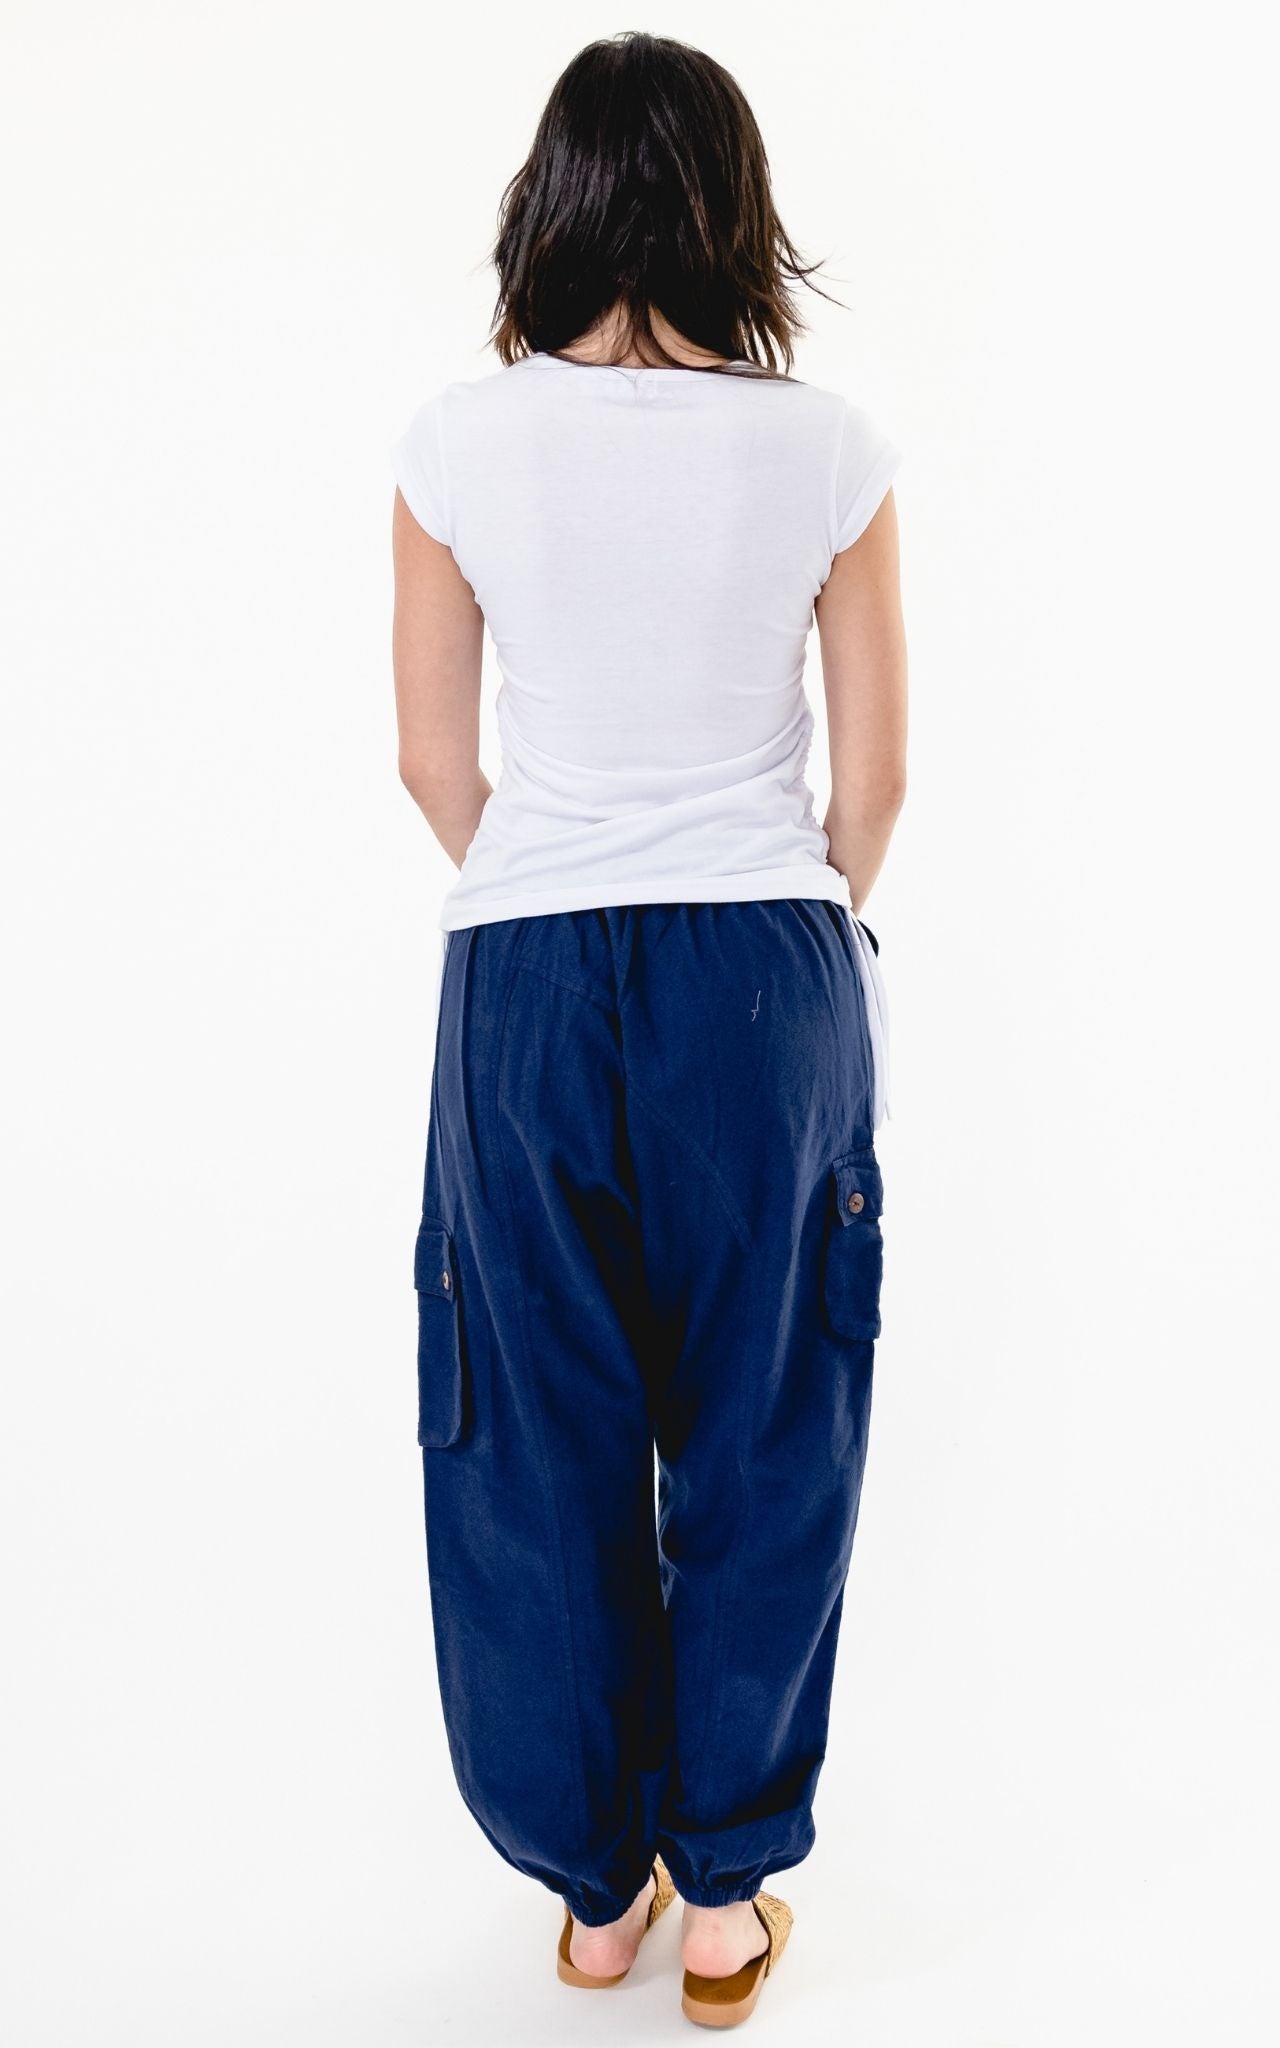 Surya Australia Ethical Drop Crotch Pants Made in Nepal - Blue